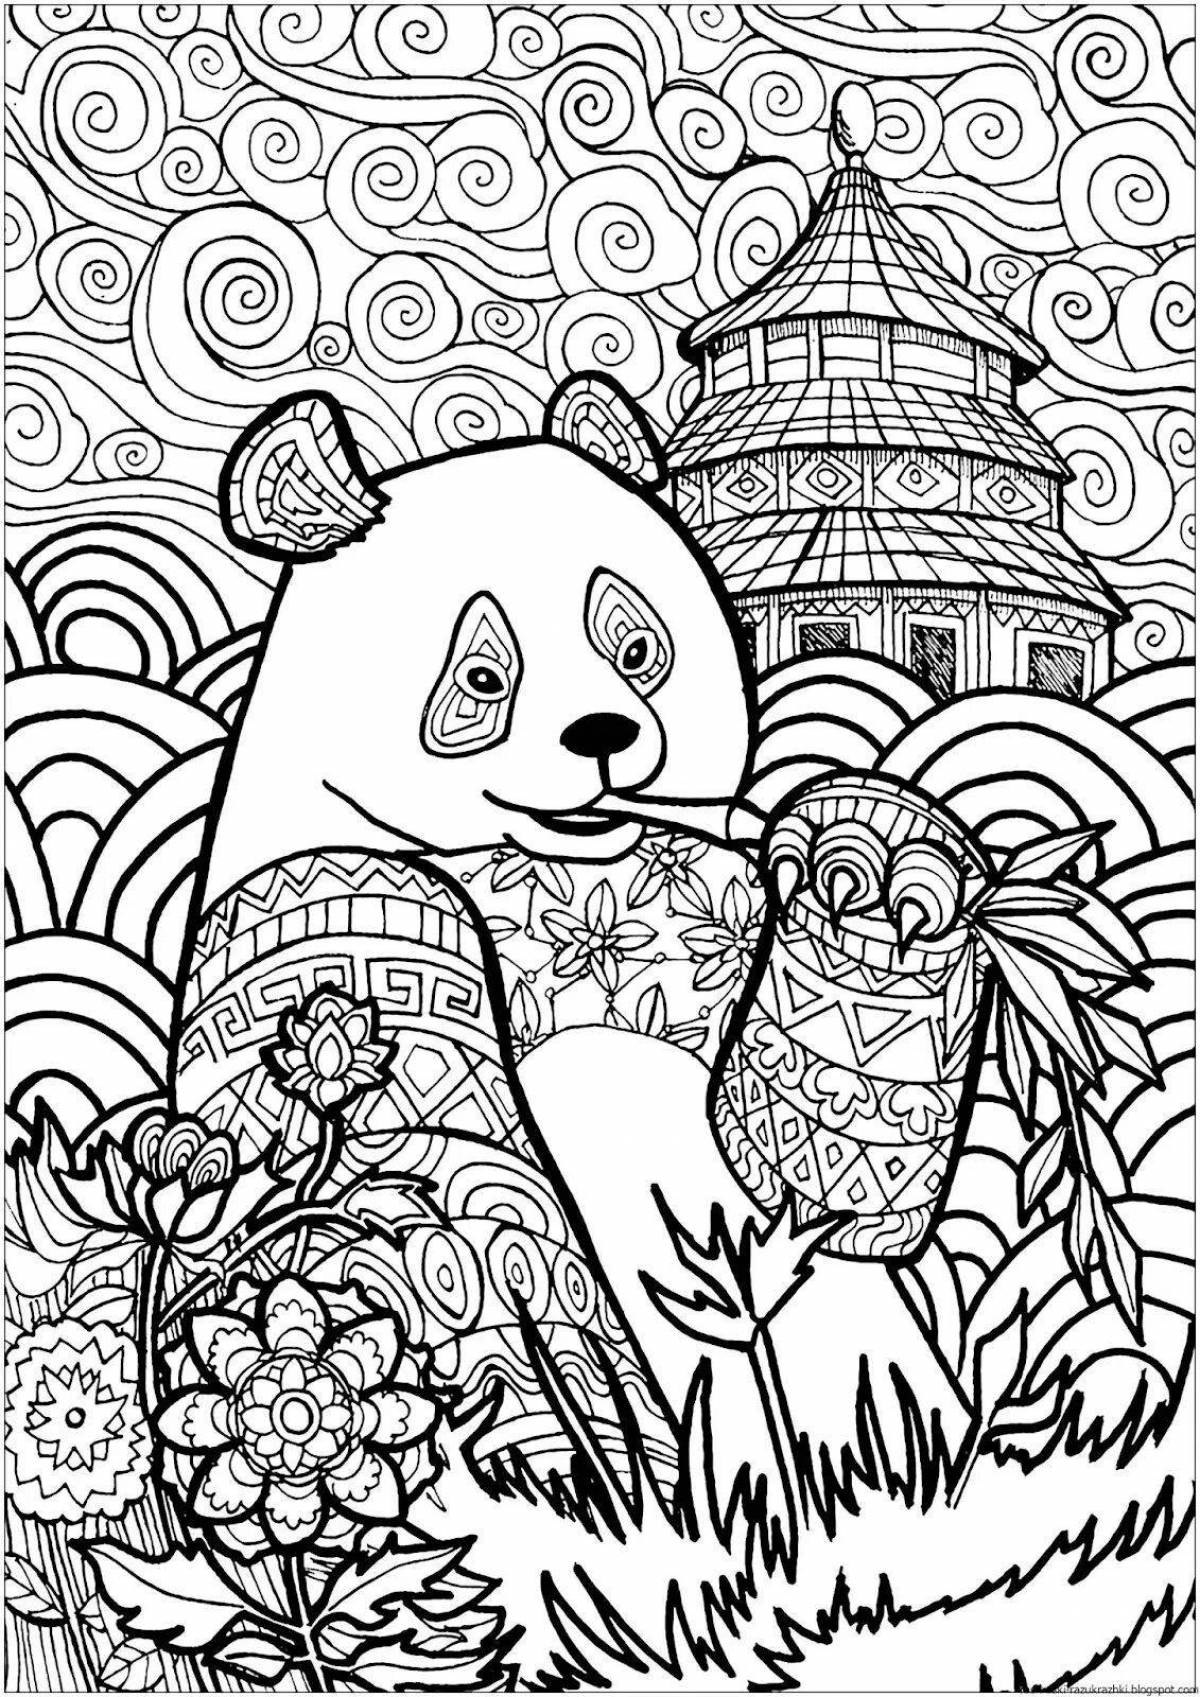 Invigorating relaxation coloring book for kids